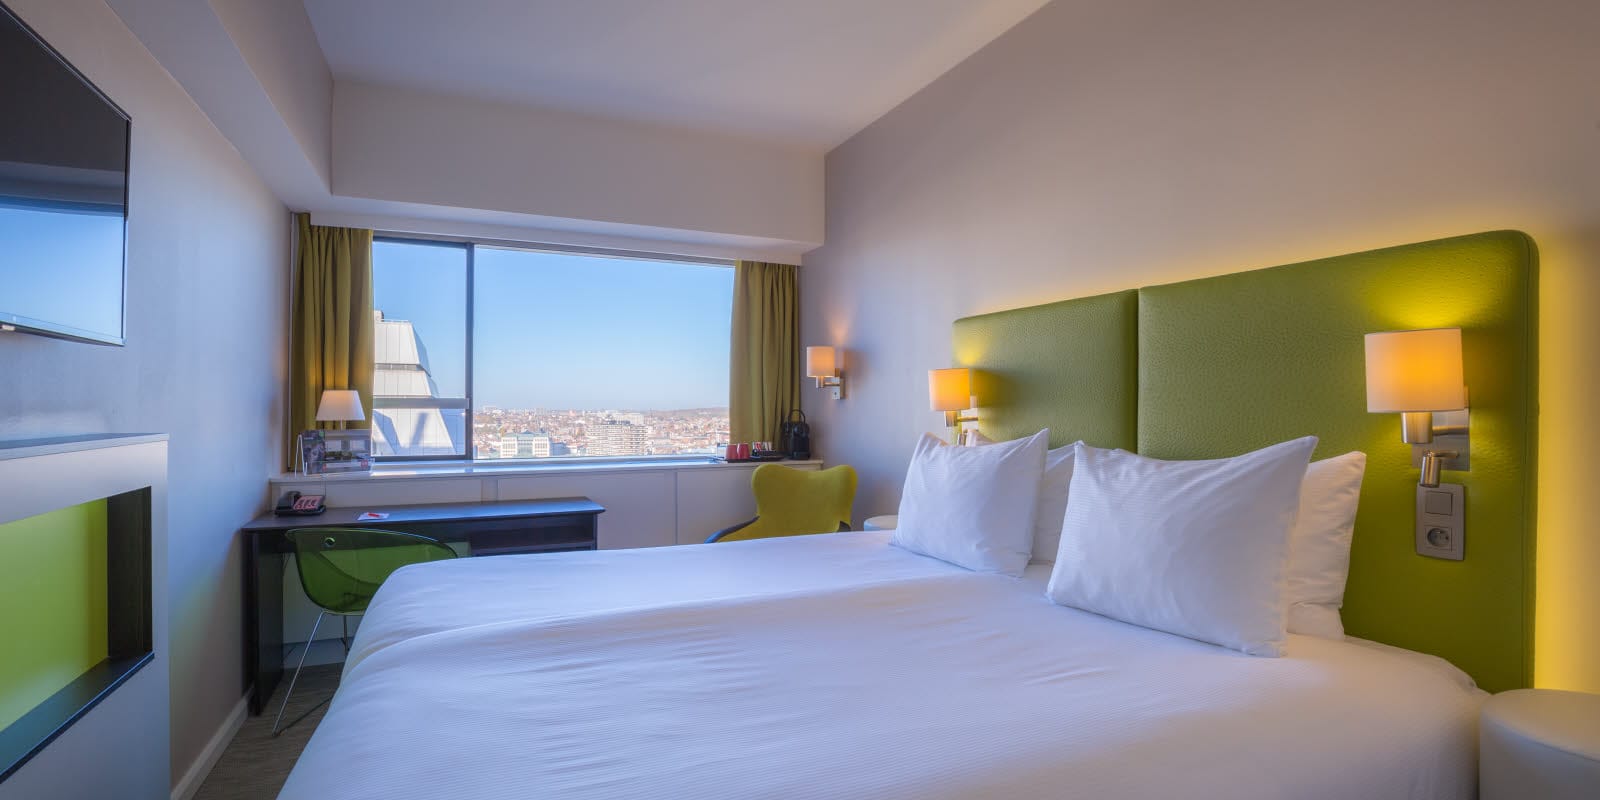 Bed in double room with view over centre of Brussels